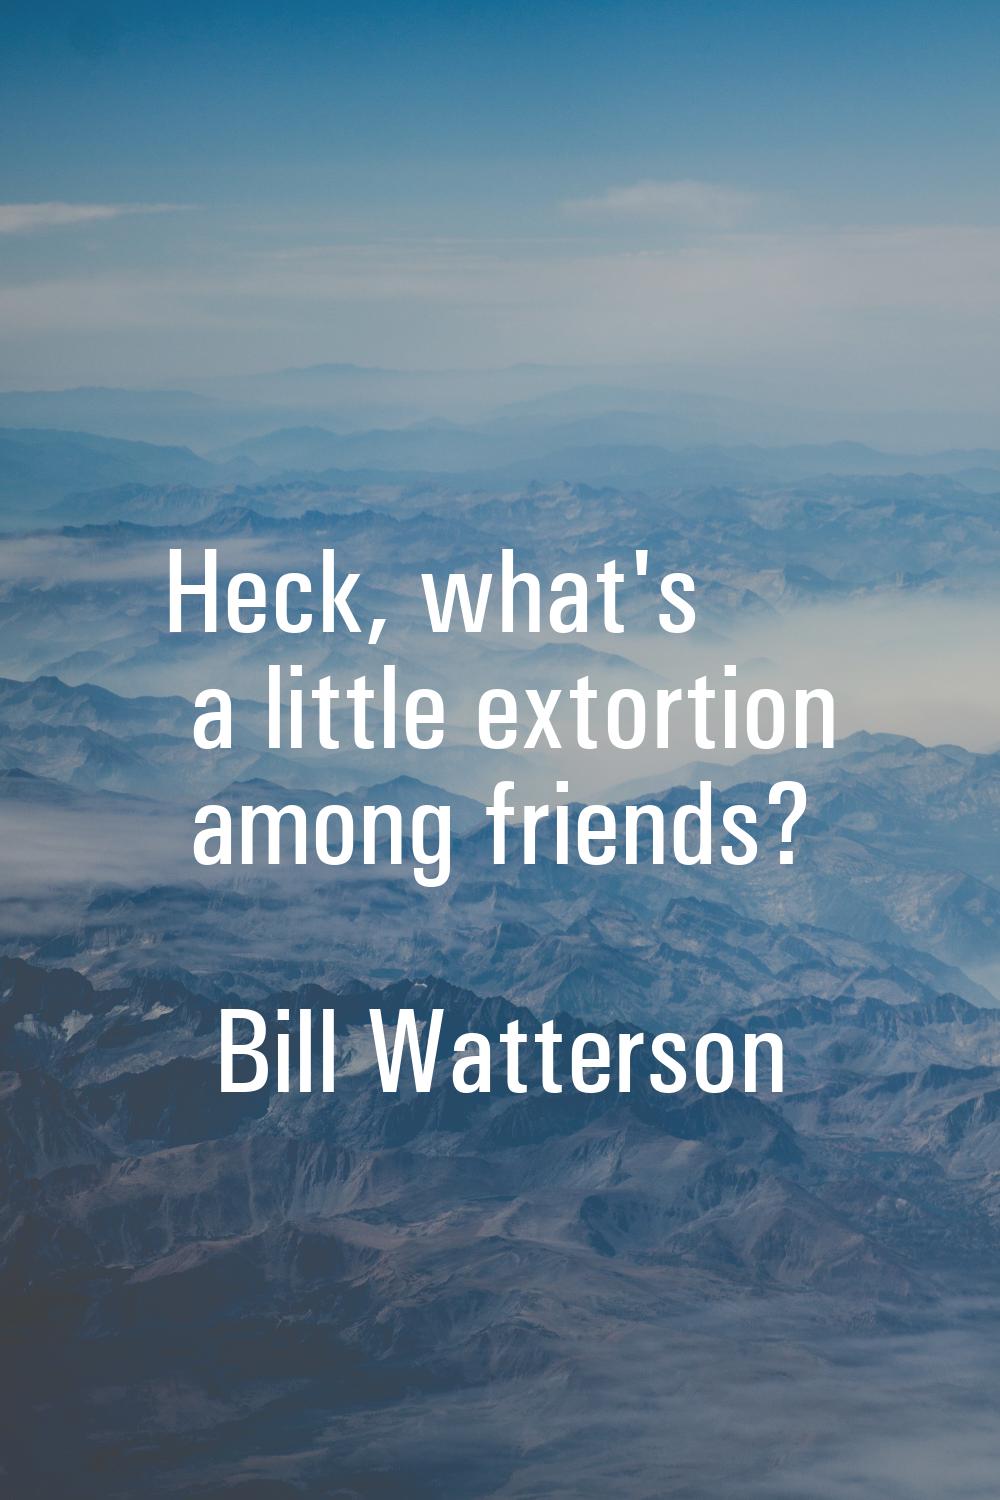 Heck, what's a little extortion among friends?